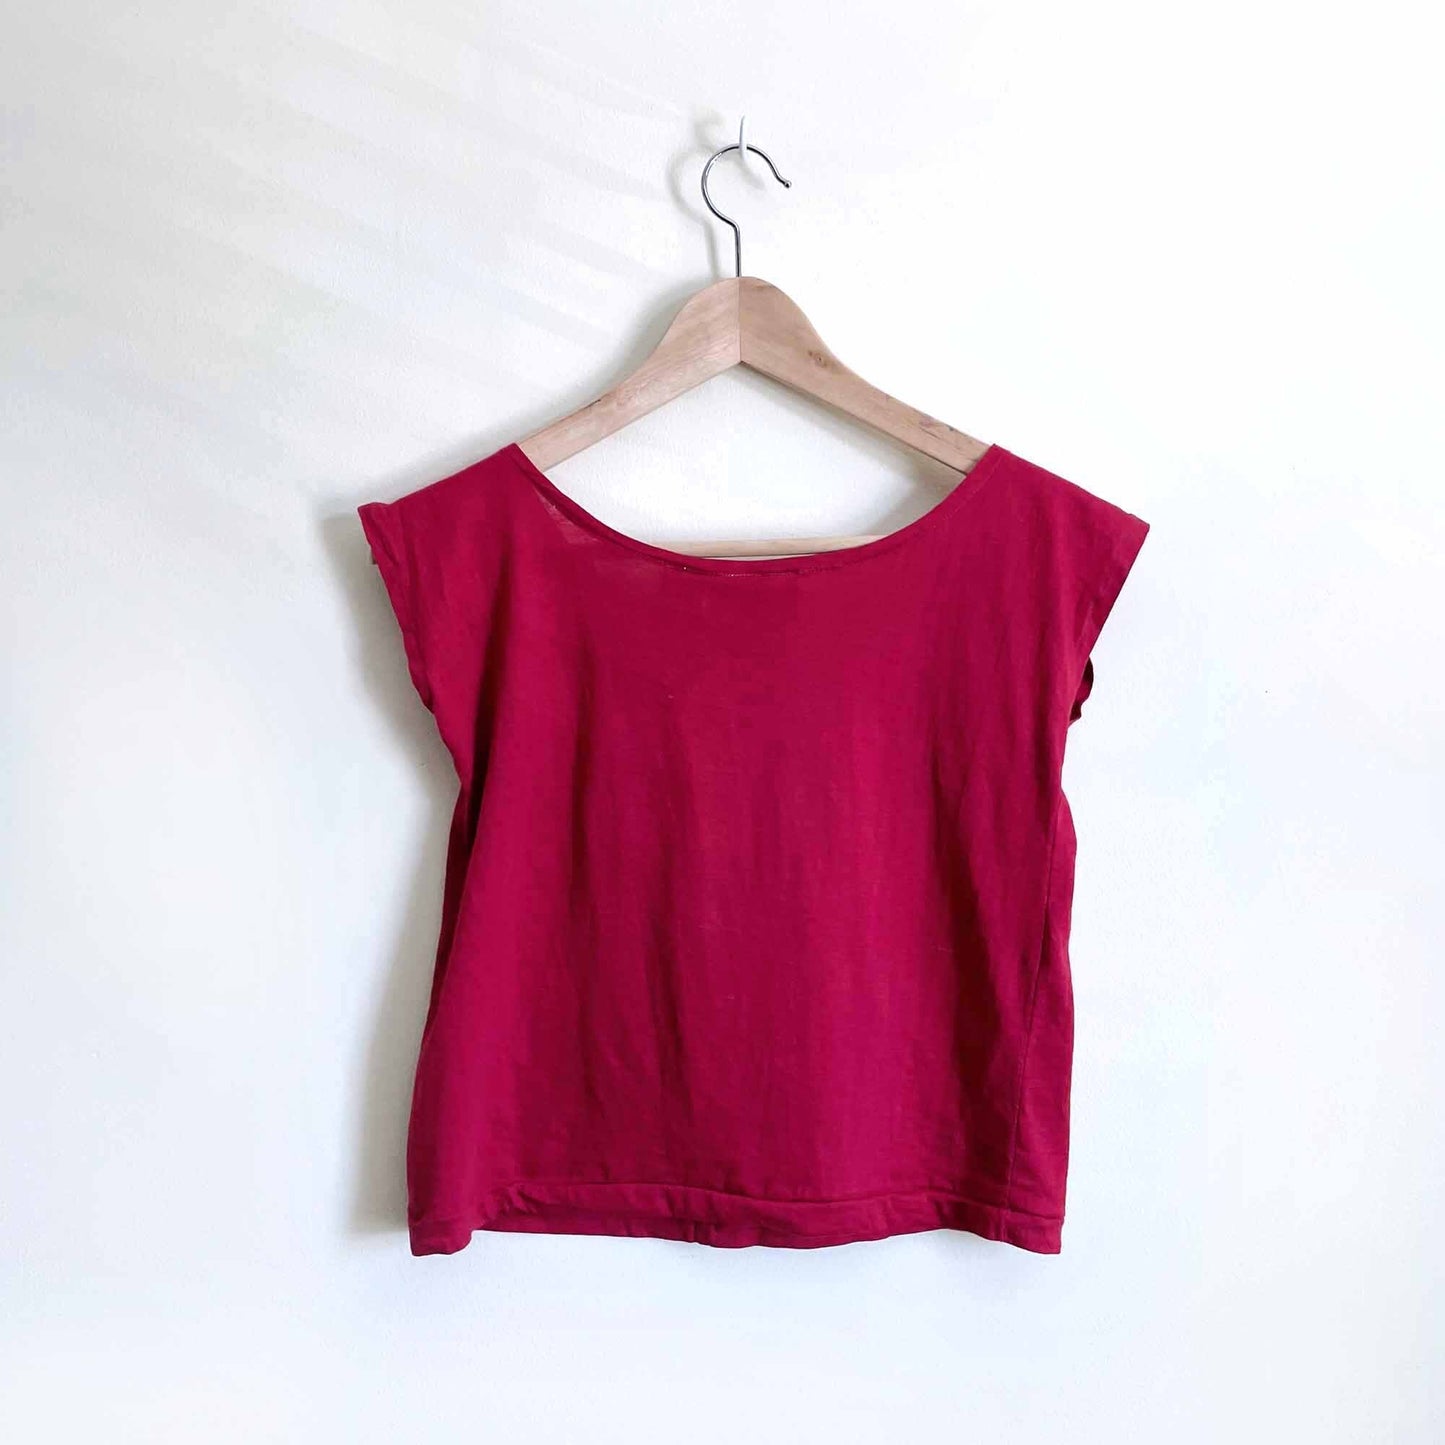 Vintage French Connection cropped tee - size Small